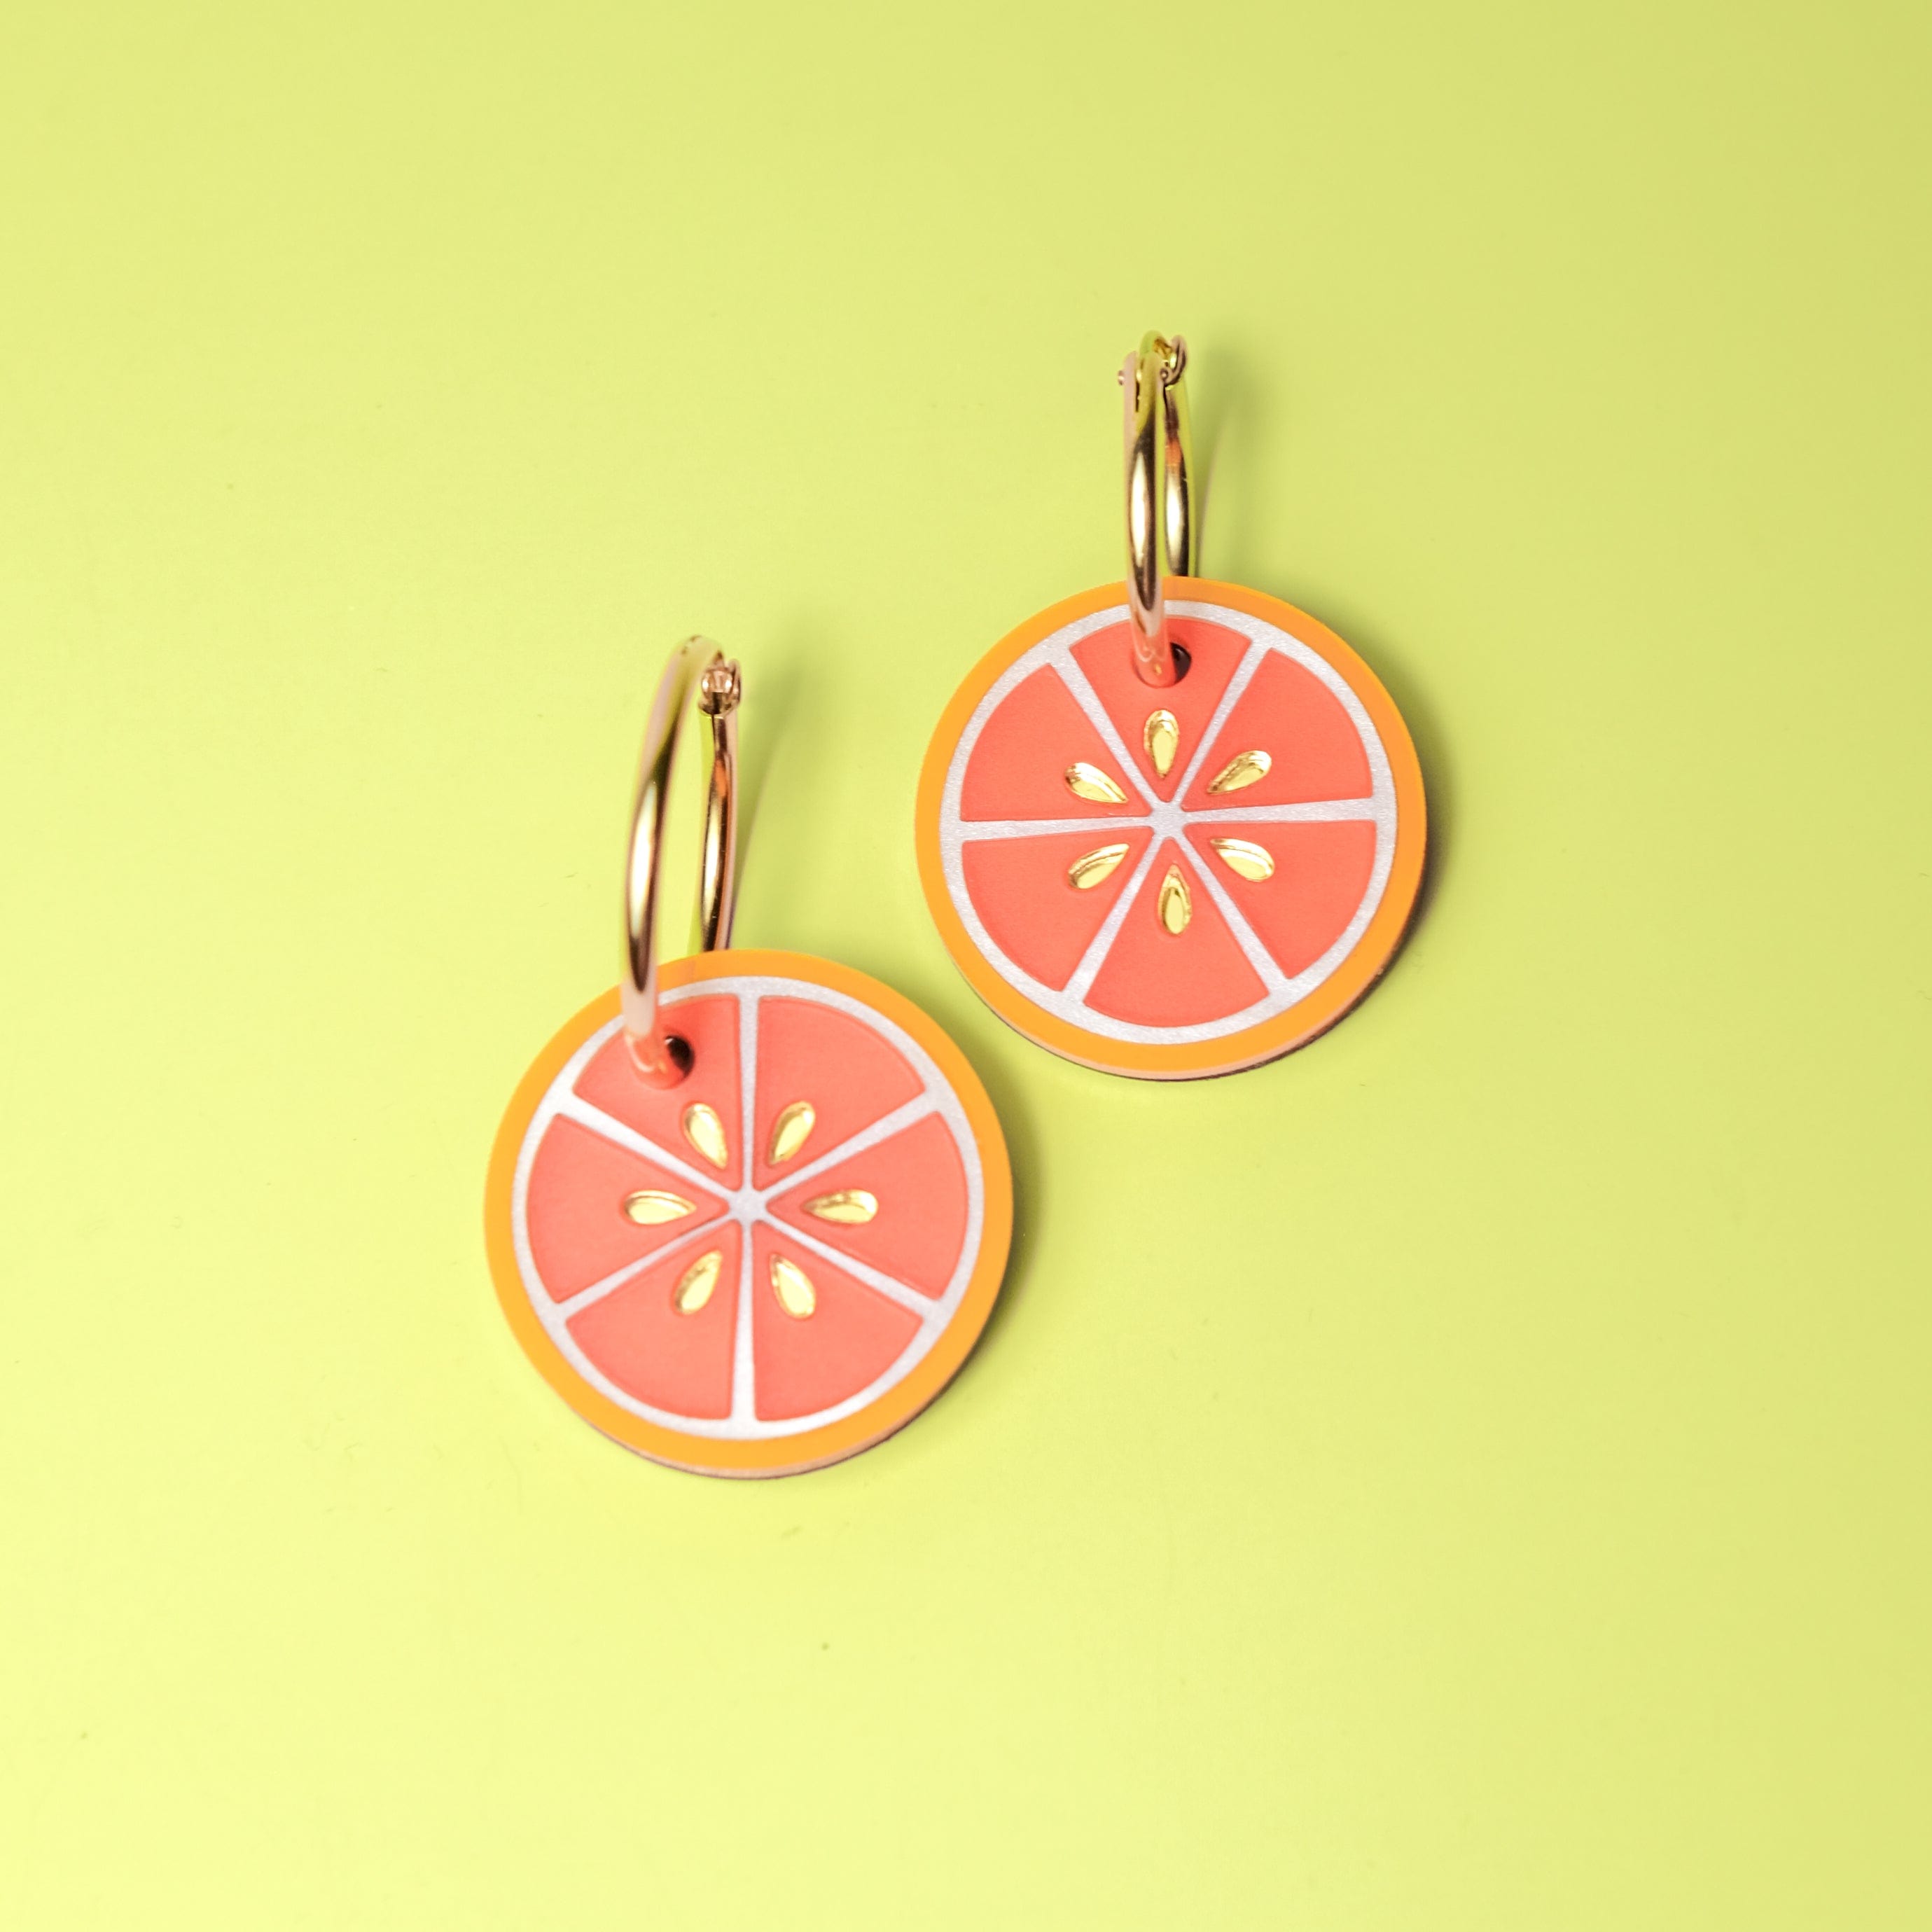 Blood Orange dangly earrings with gold-filled hoops